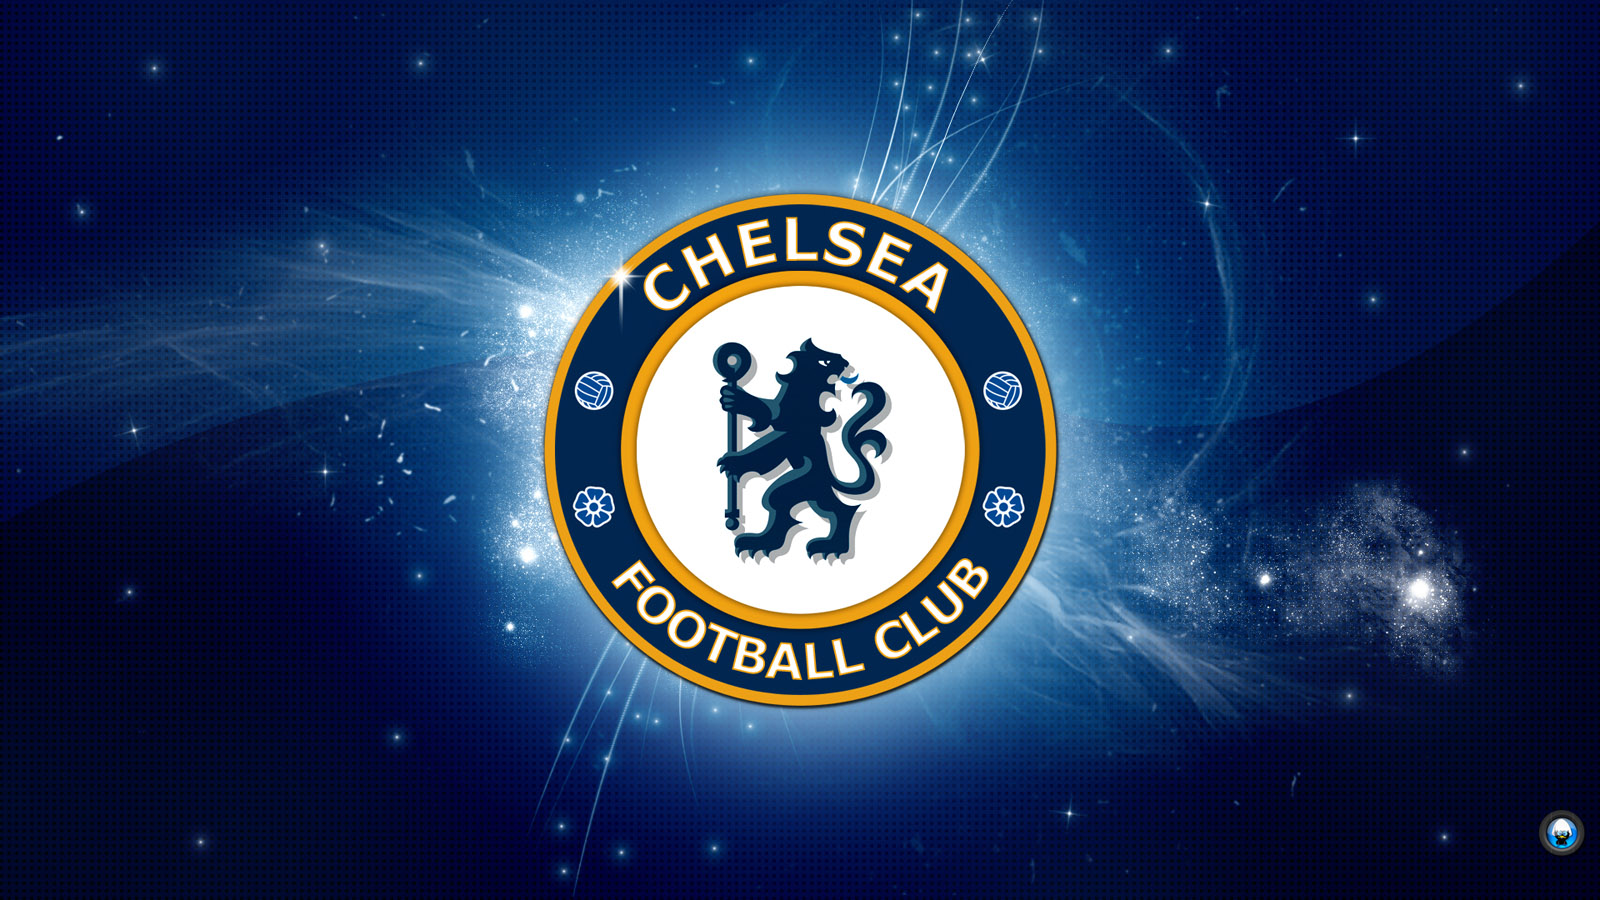 Chelsea FC Logo Download in HD Quality